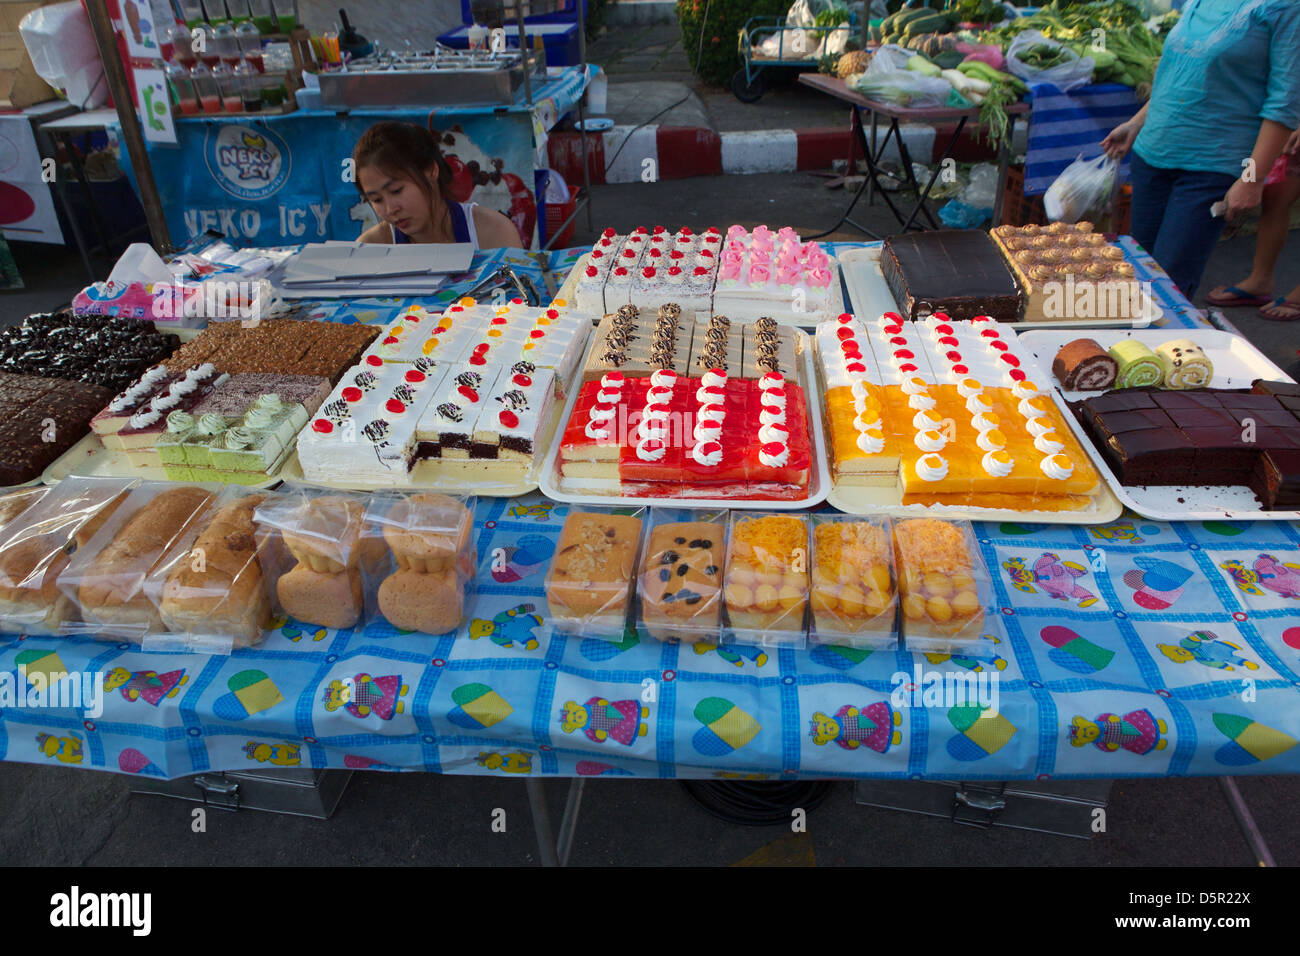 Pastries for sale at an open air market in Bangkok Thailand Stock Photo